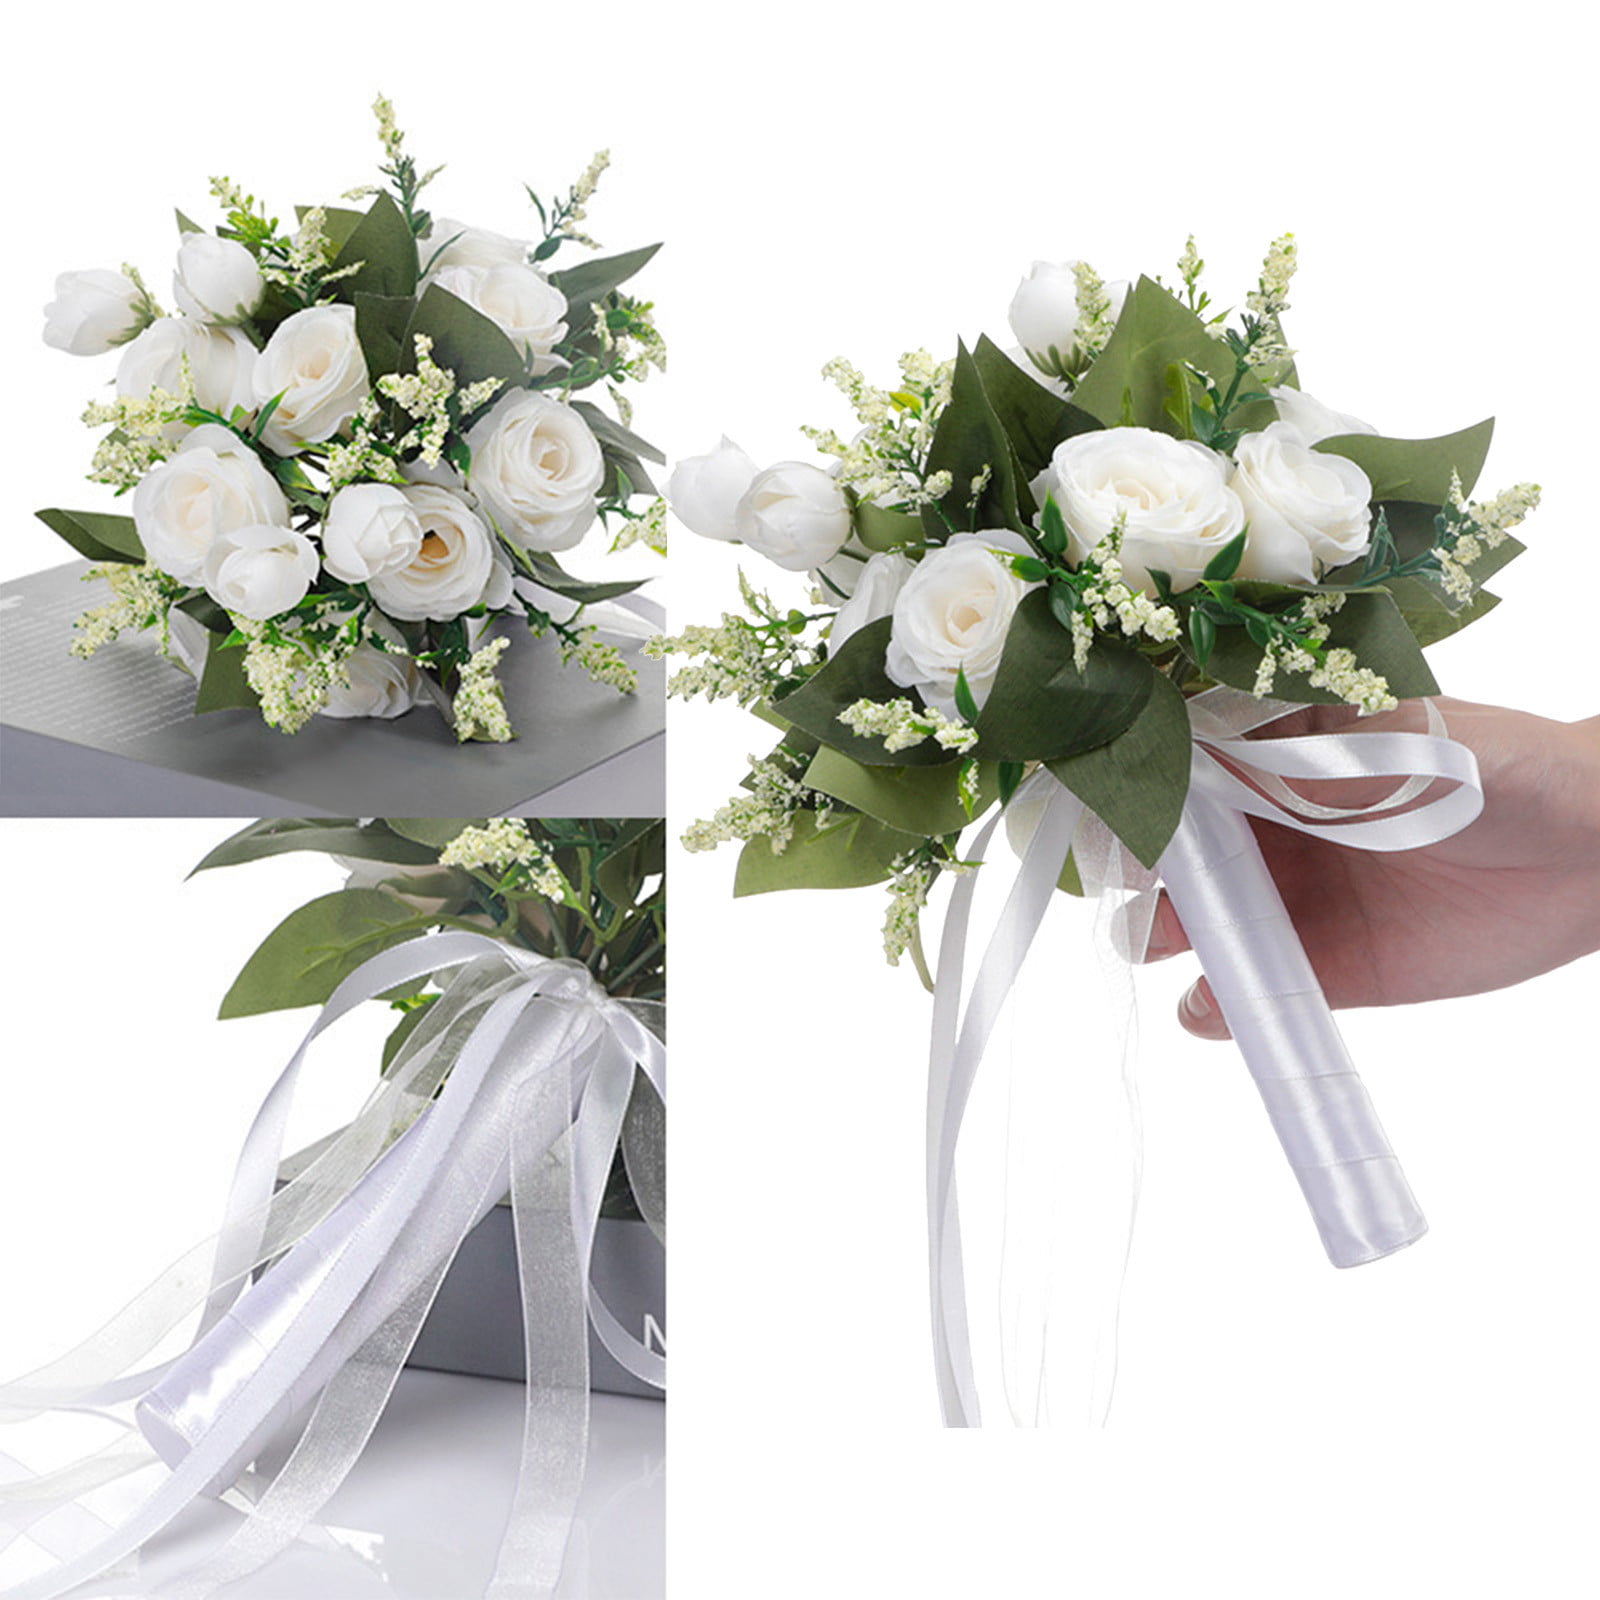 vLoveLife Wedding Bouquet for Bride 12 Inch, White Bridal Bouquet Holder  Flowers, Artificial Flowers for Wedding Favors Supplies